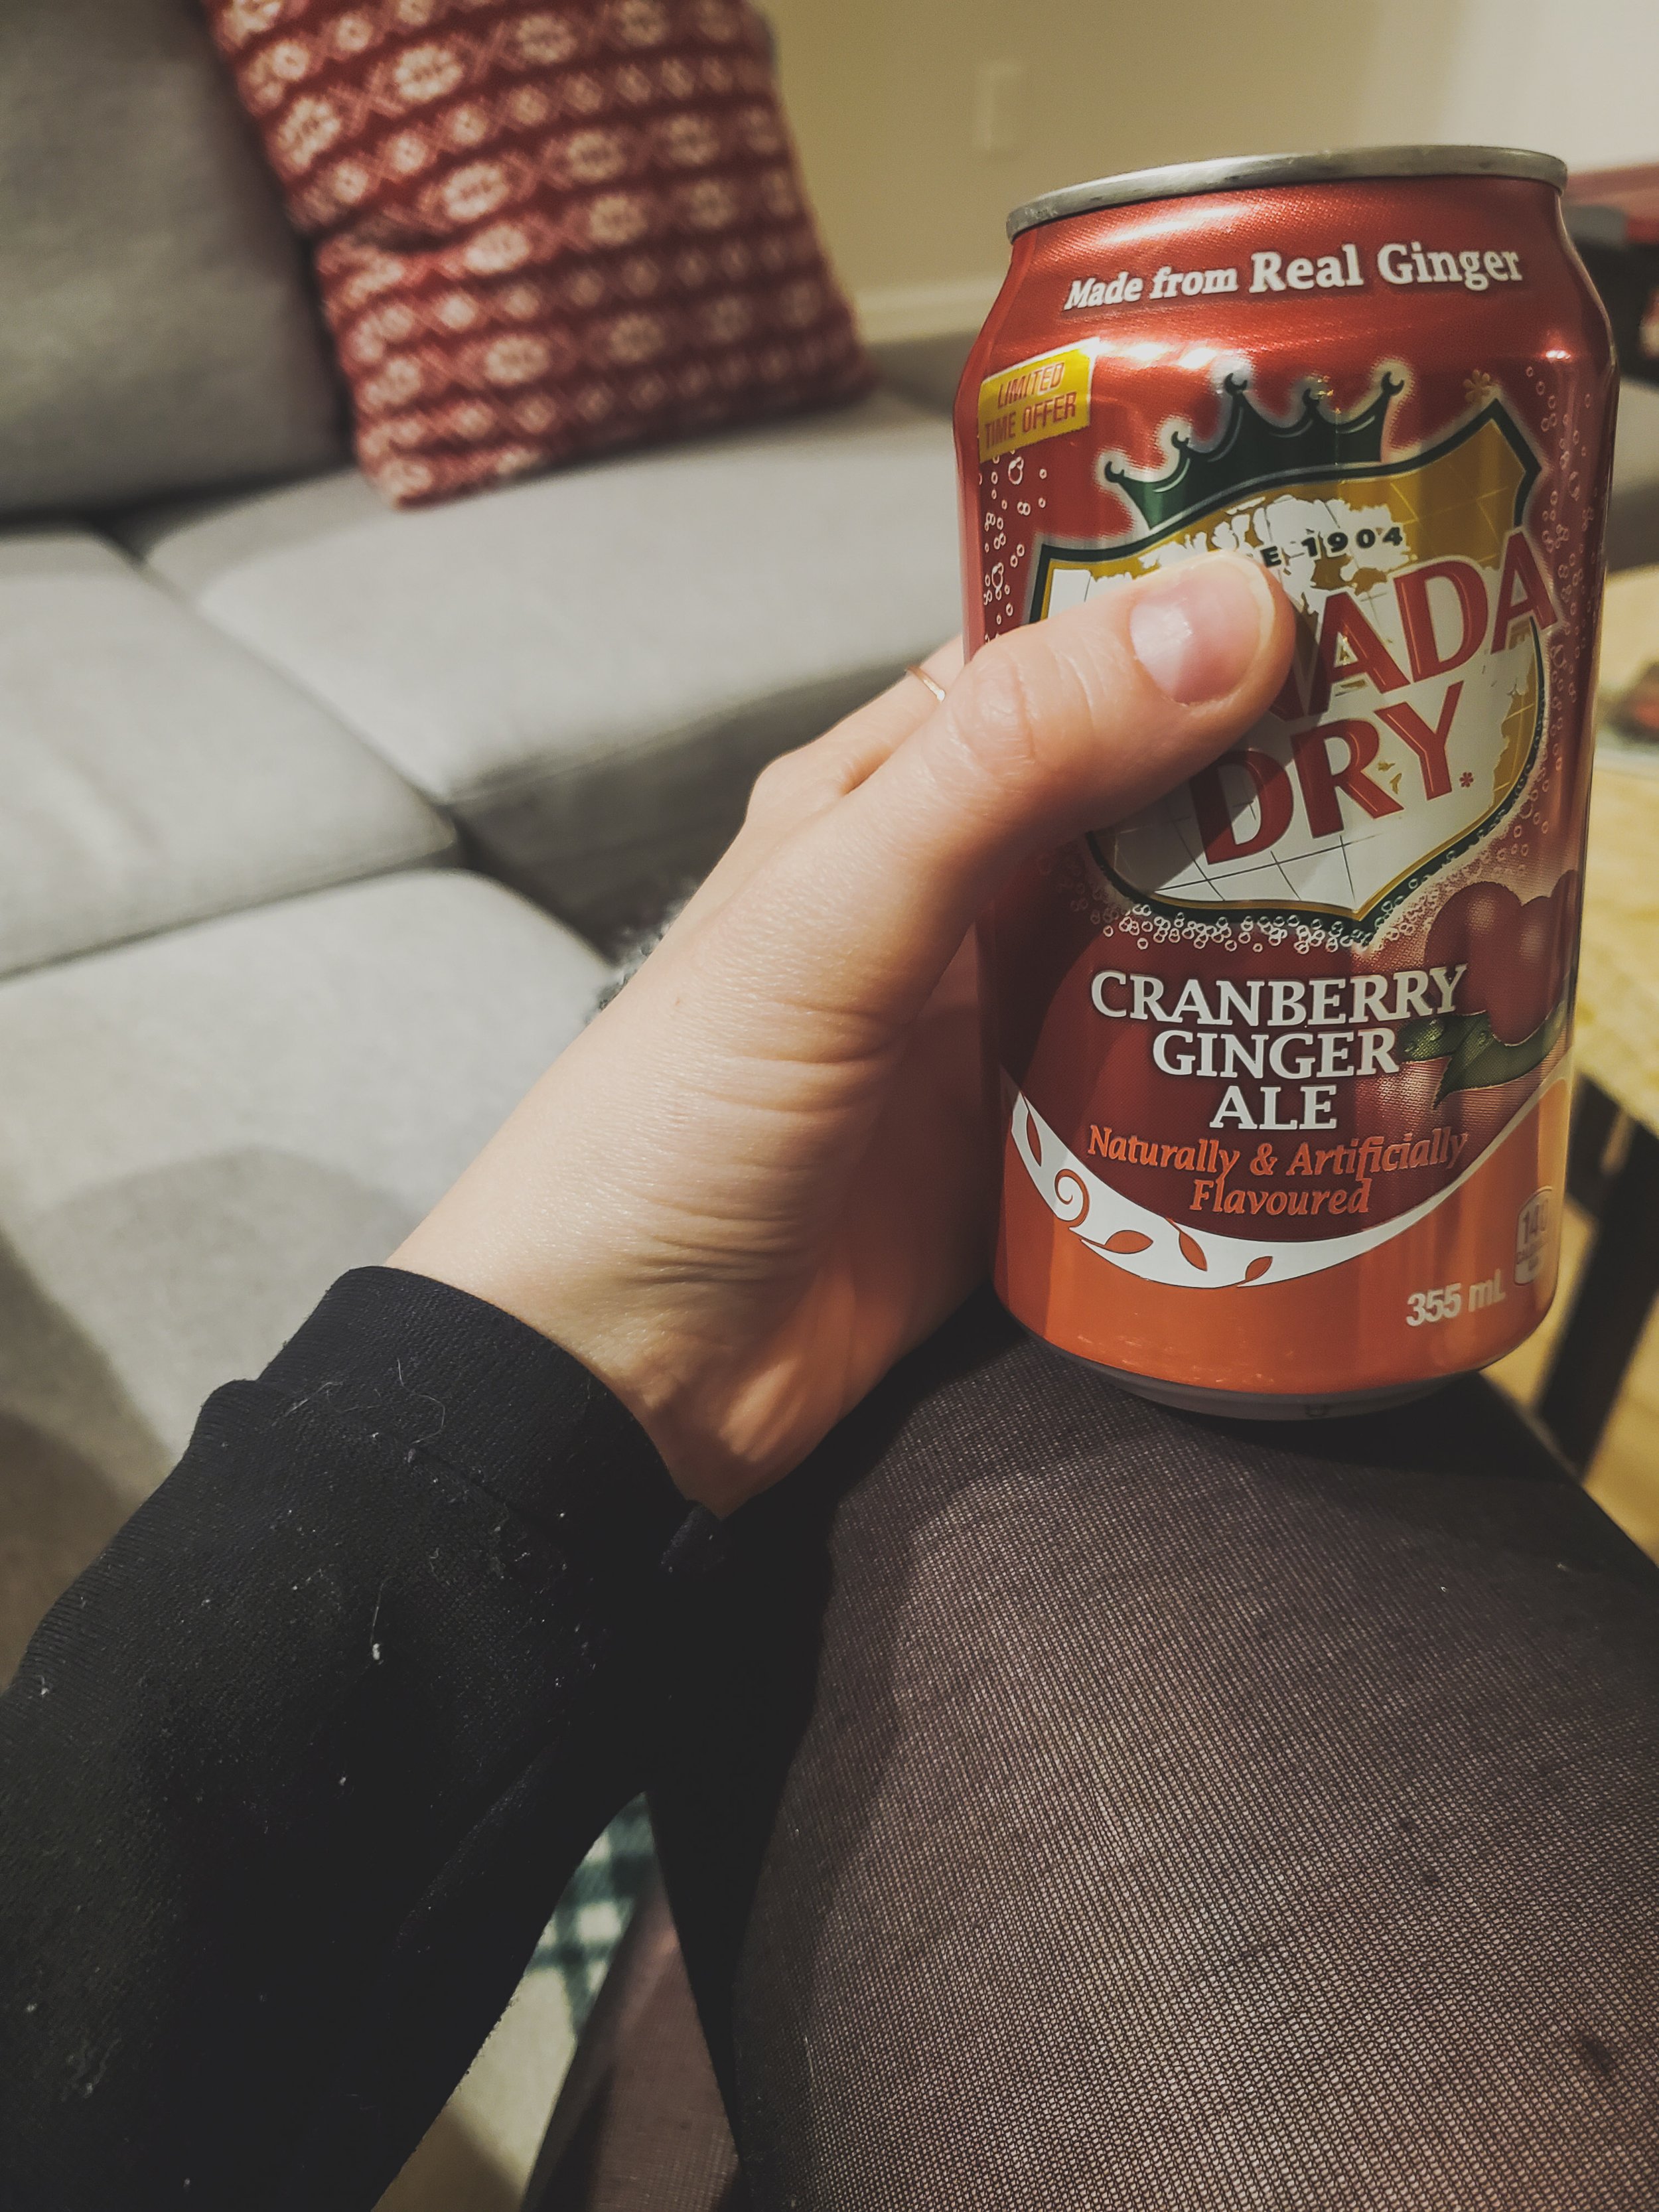  Something about that cran gingerale. 